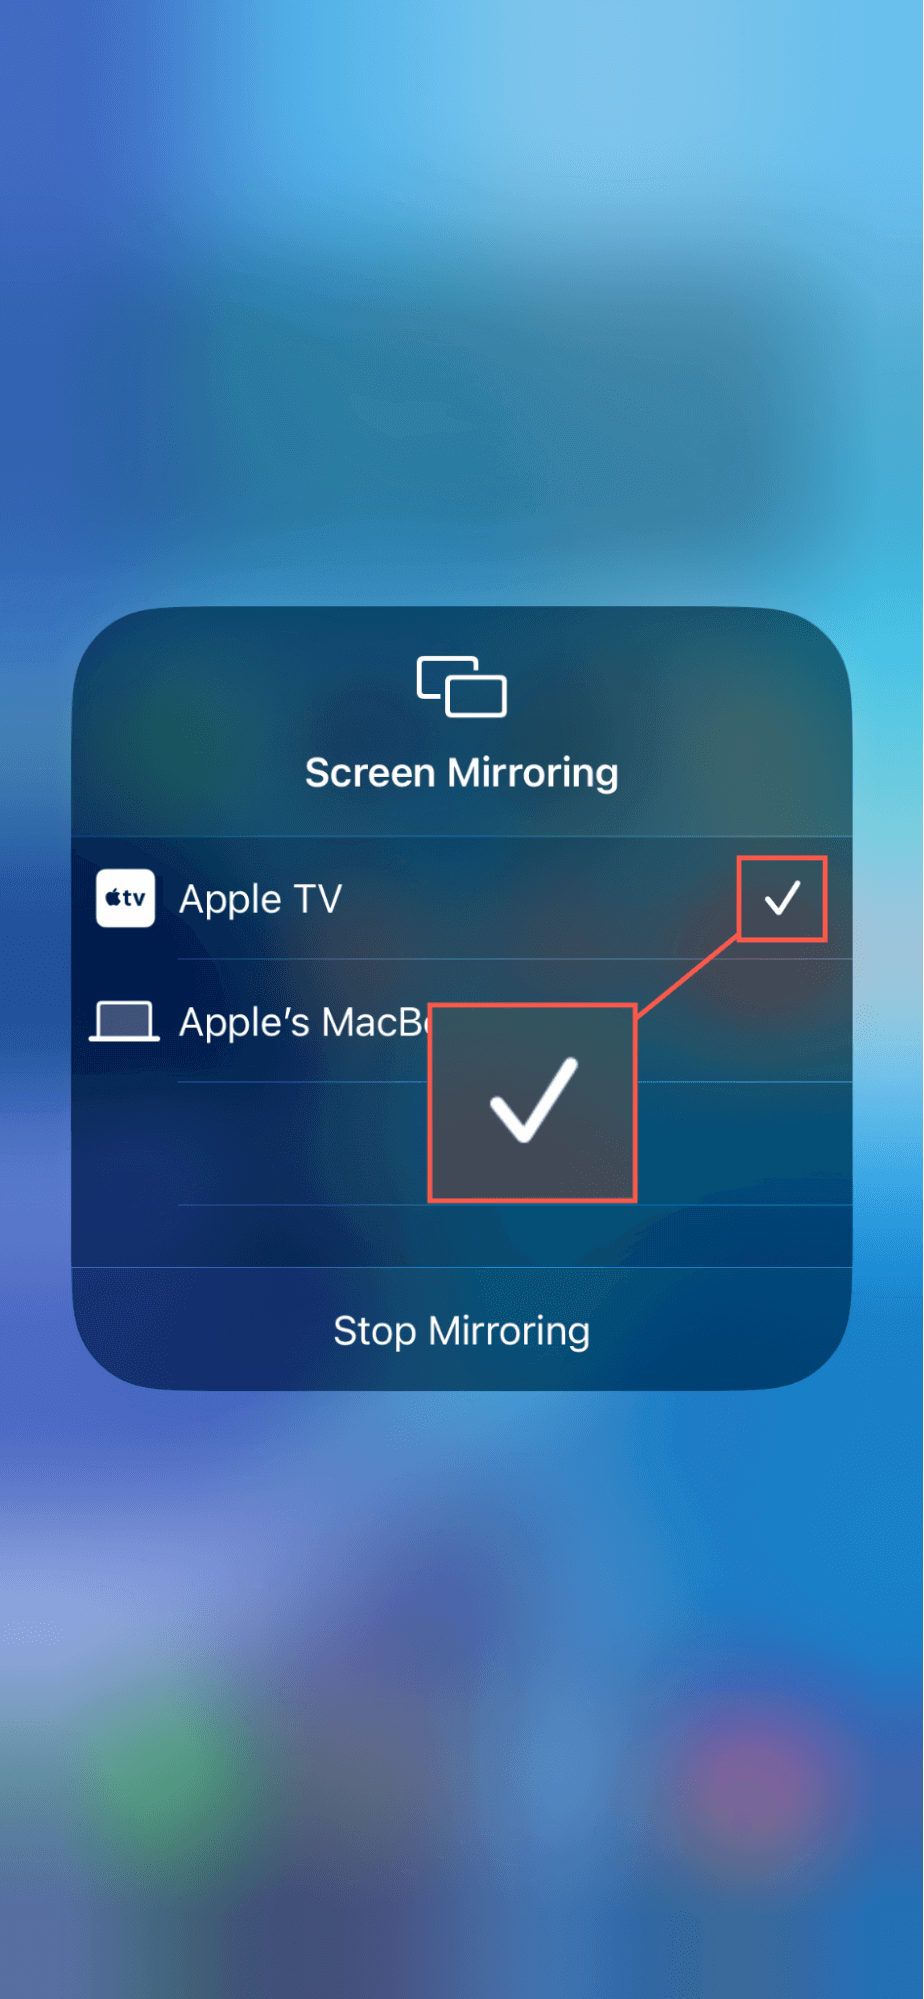 A mirrored screen appears on the AirPlay device